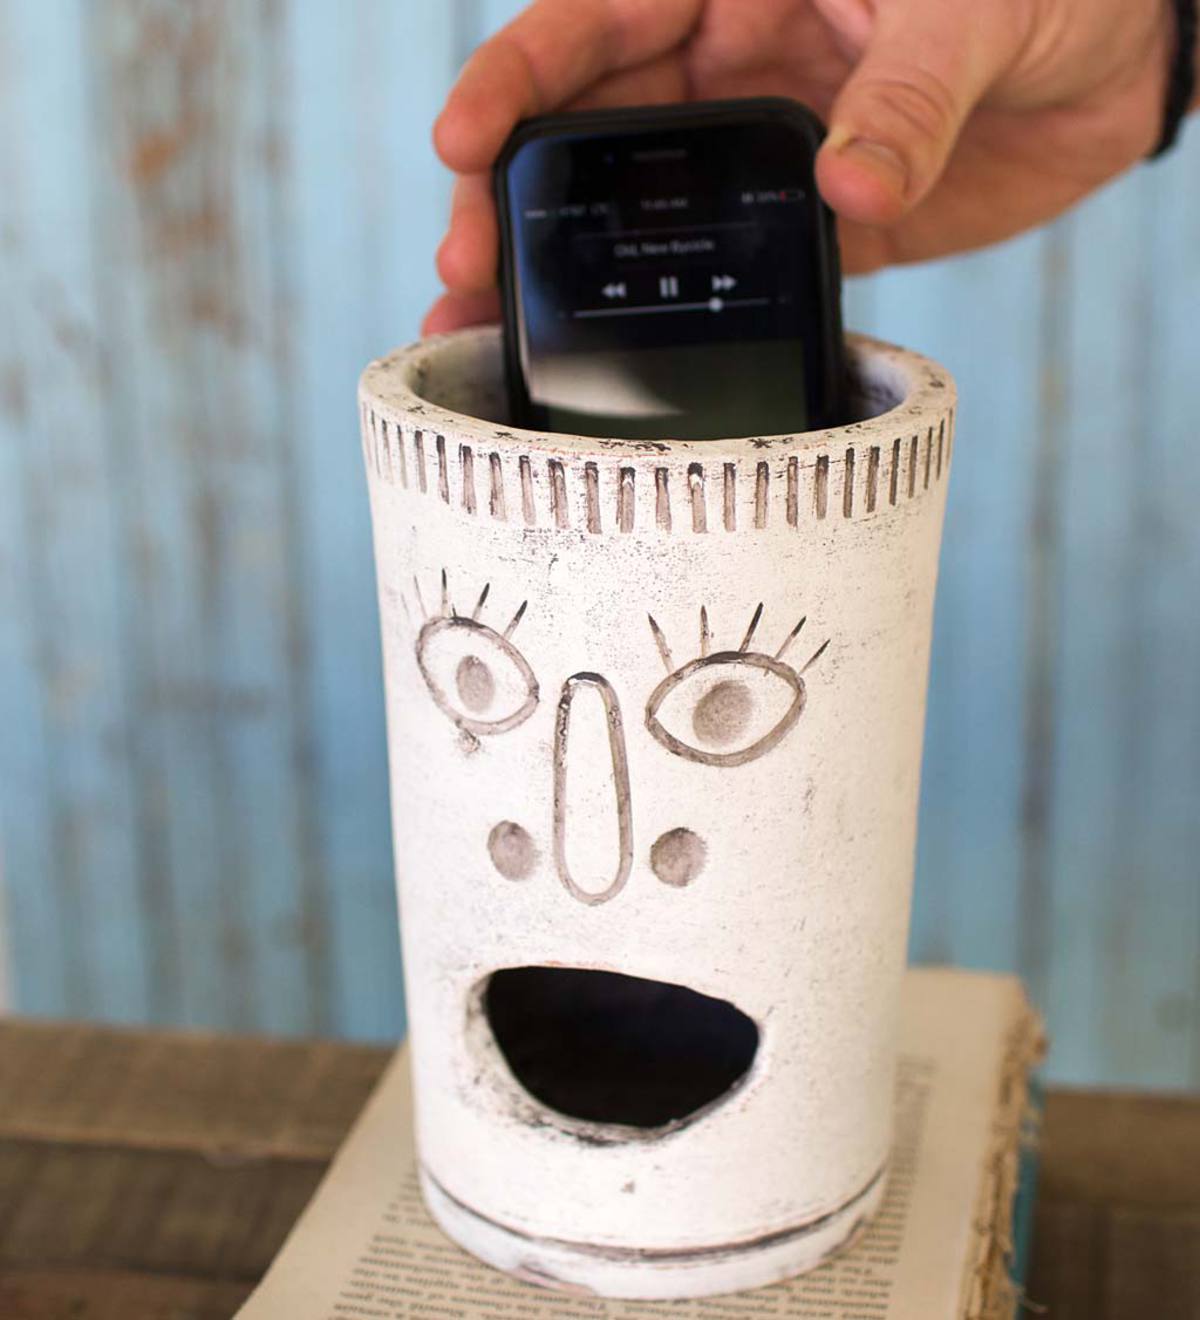 Clay Big Mouth Smartphone Speaker